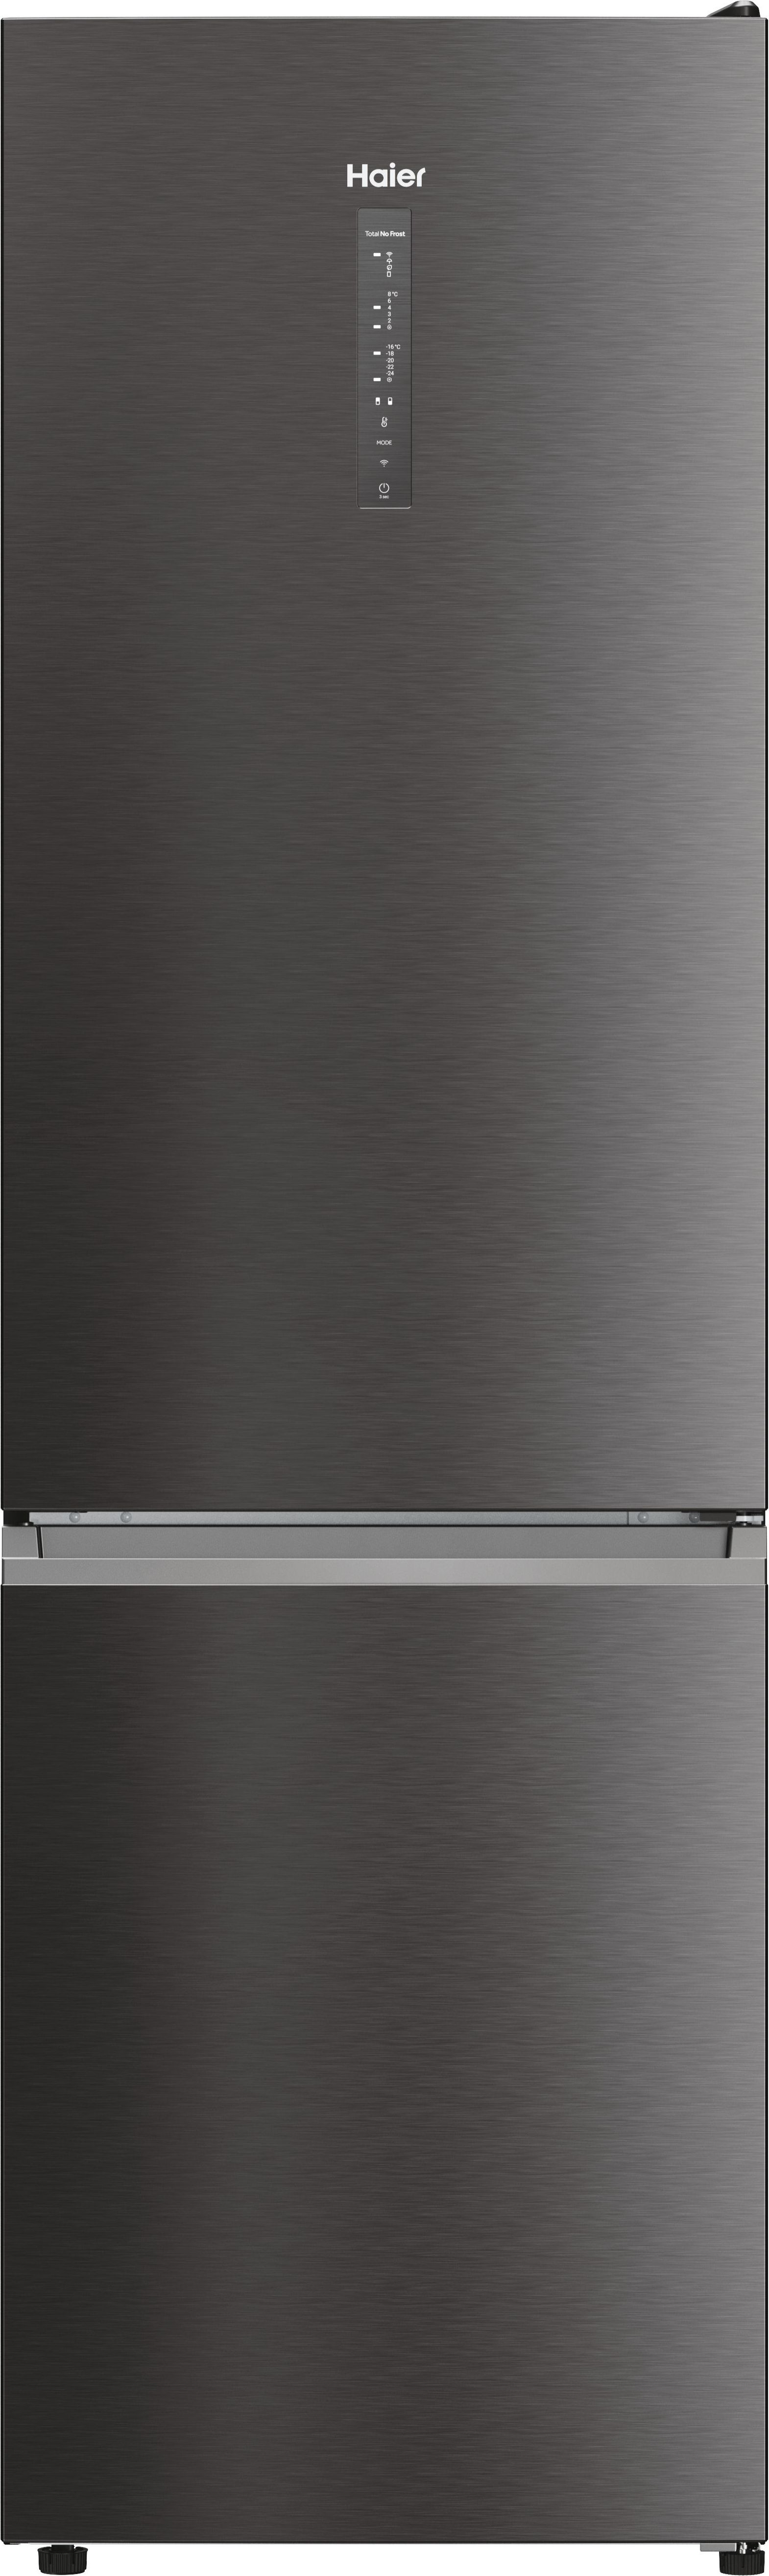 Haier HDW3620DNPD(UK) Wifi Connected 60/40 Frost Free Fridge Freezer - Premium Inox - D Rated, Stainless Steel